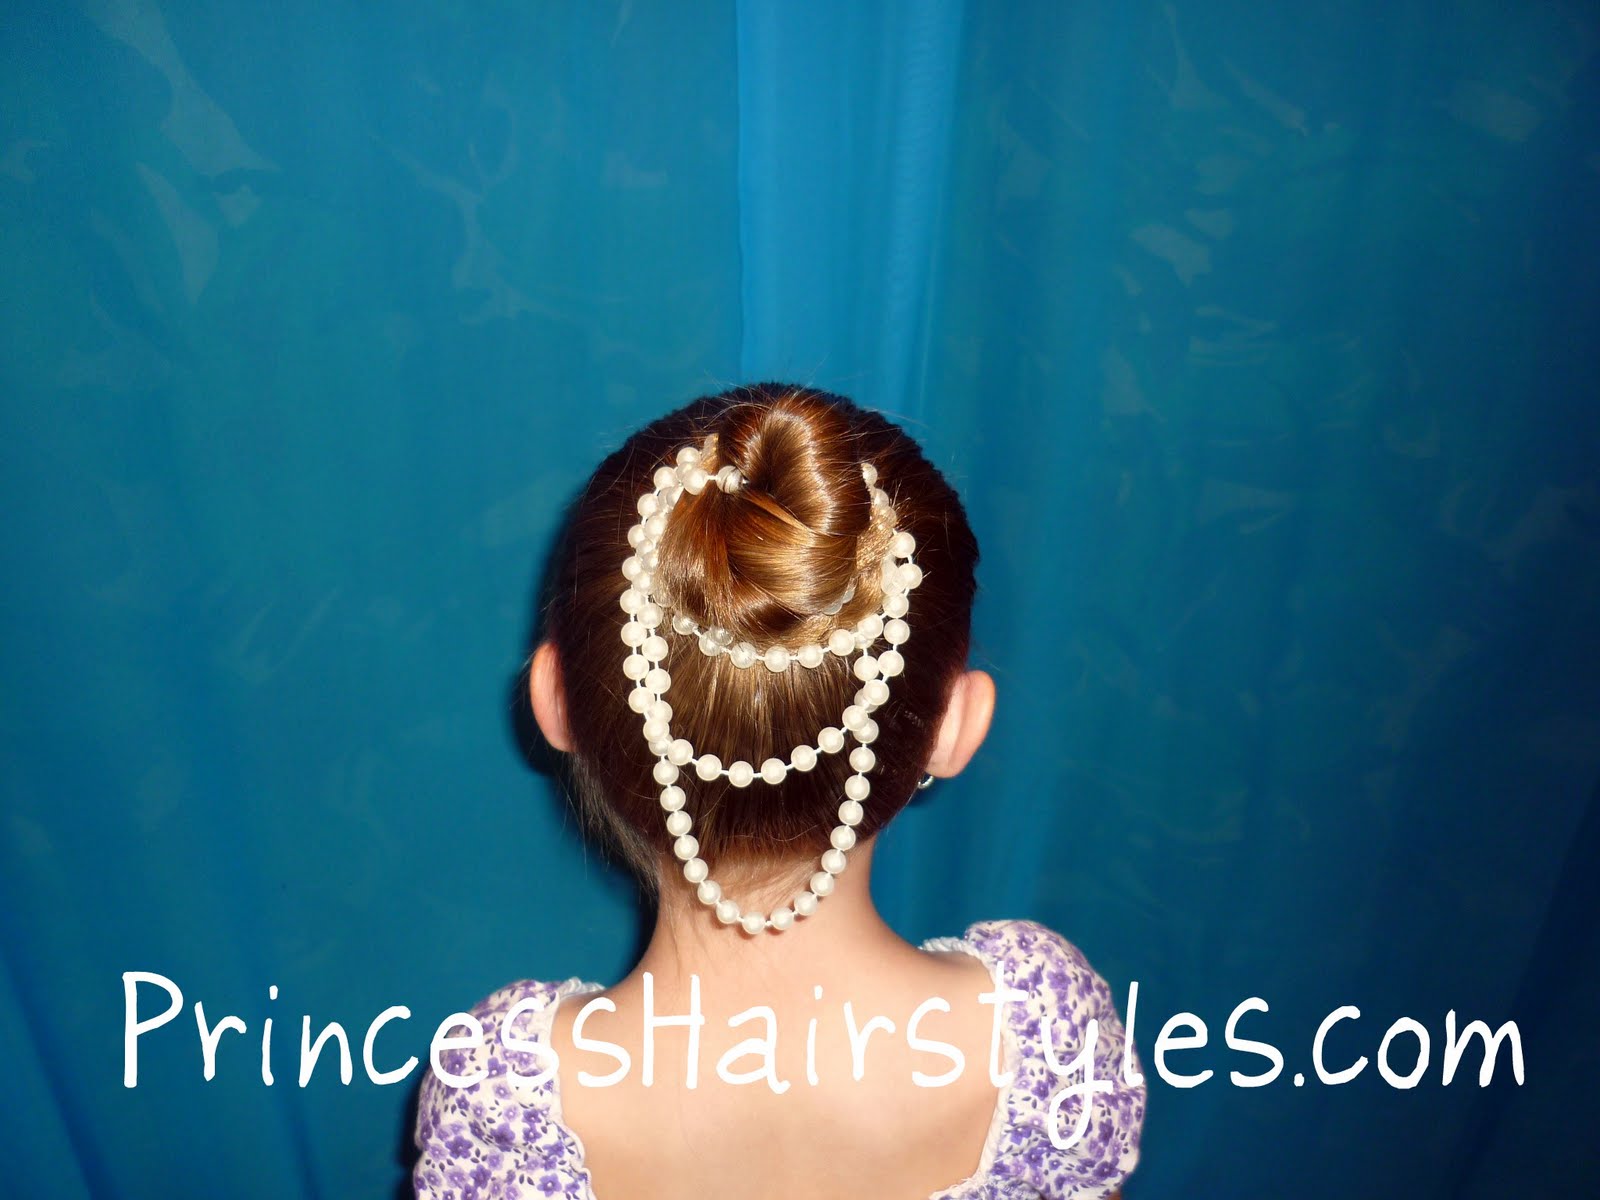 A Sweet and Innocent Updo - The Hair Bar - Blow Outs, Makeup Application  and More.